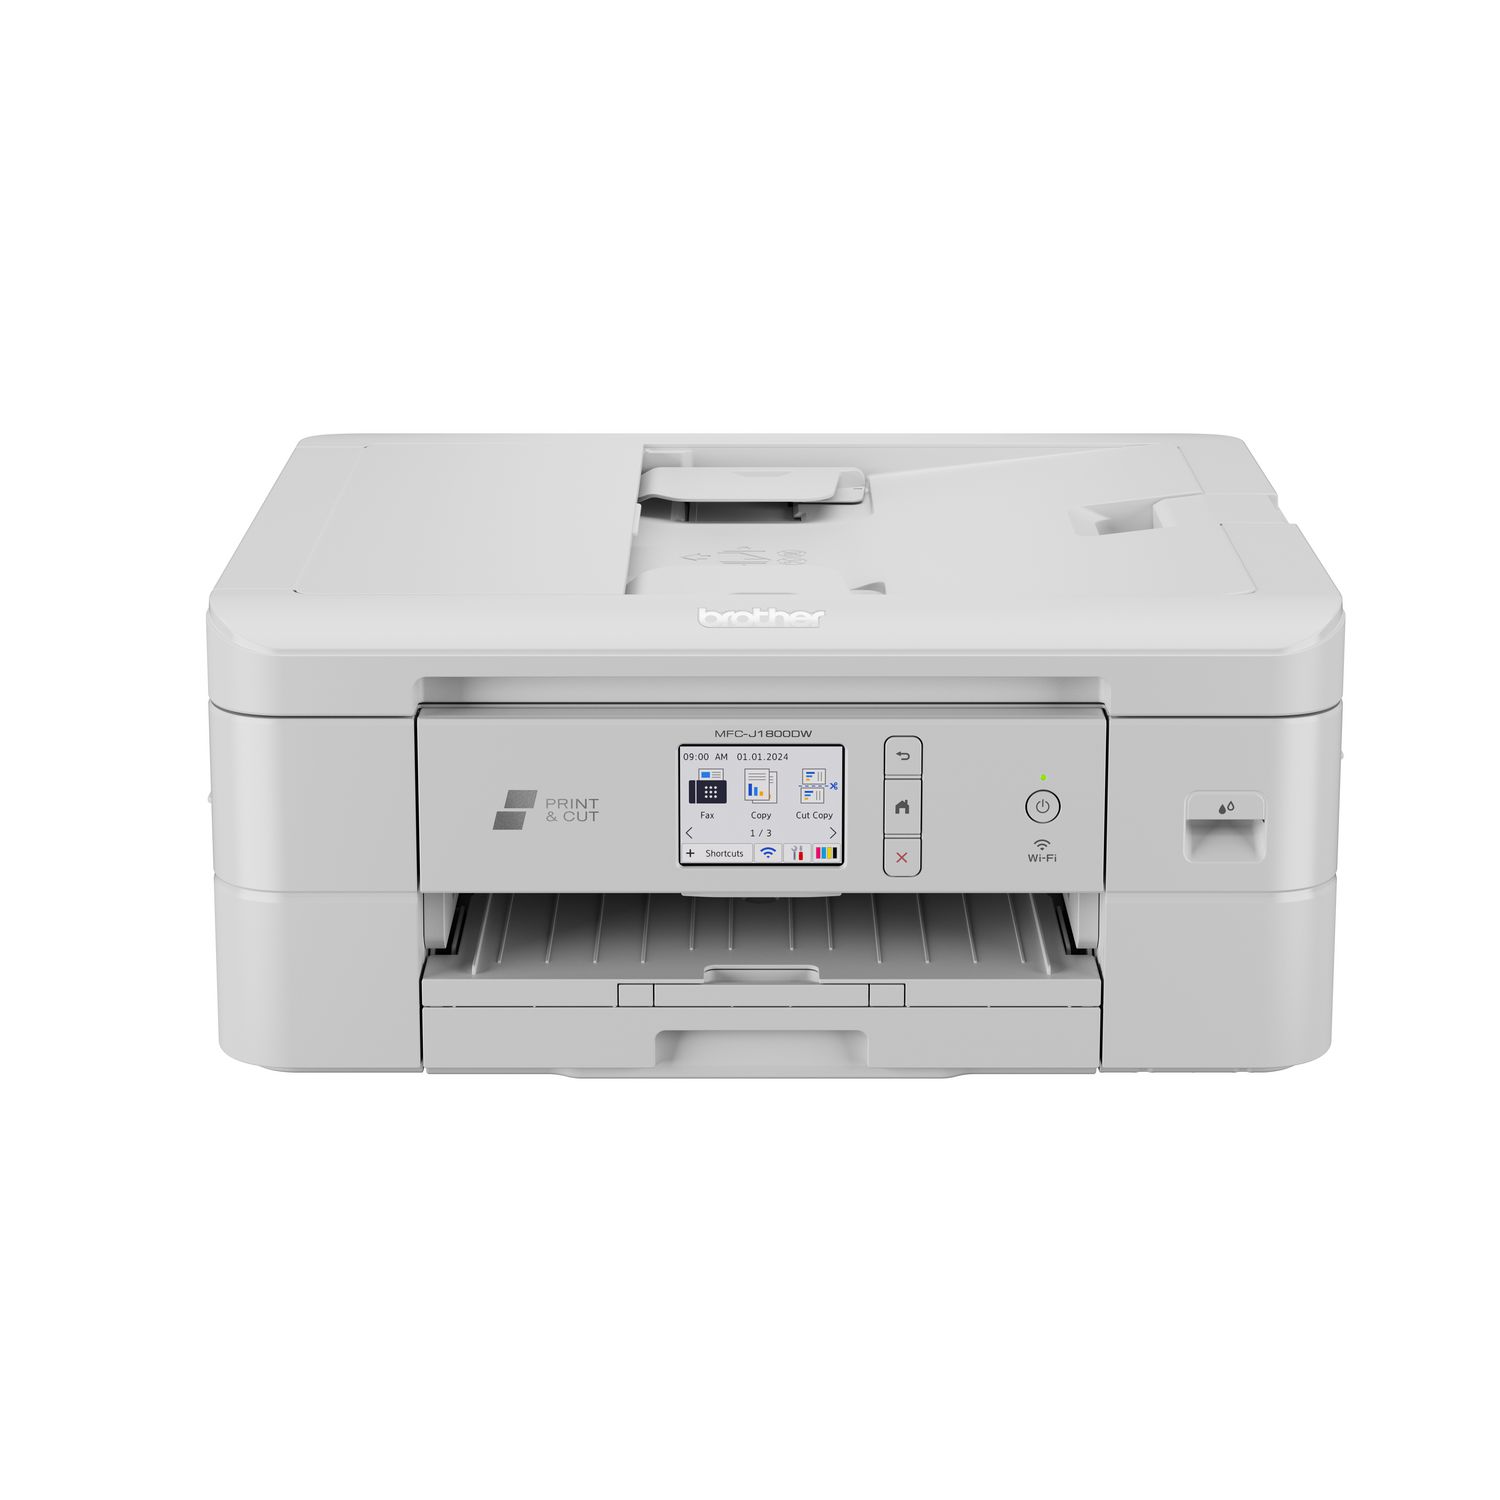 MFC-J1800DW Print and Cut All-in-One Inkjet Printer with Auto